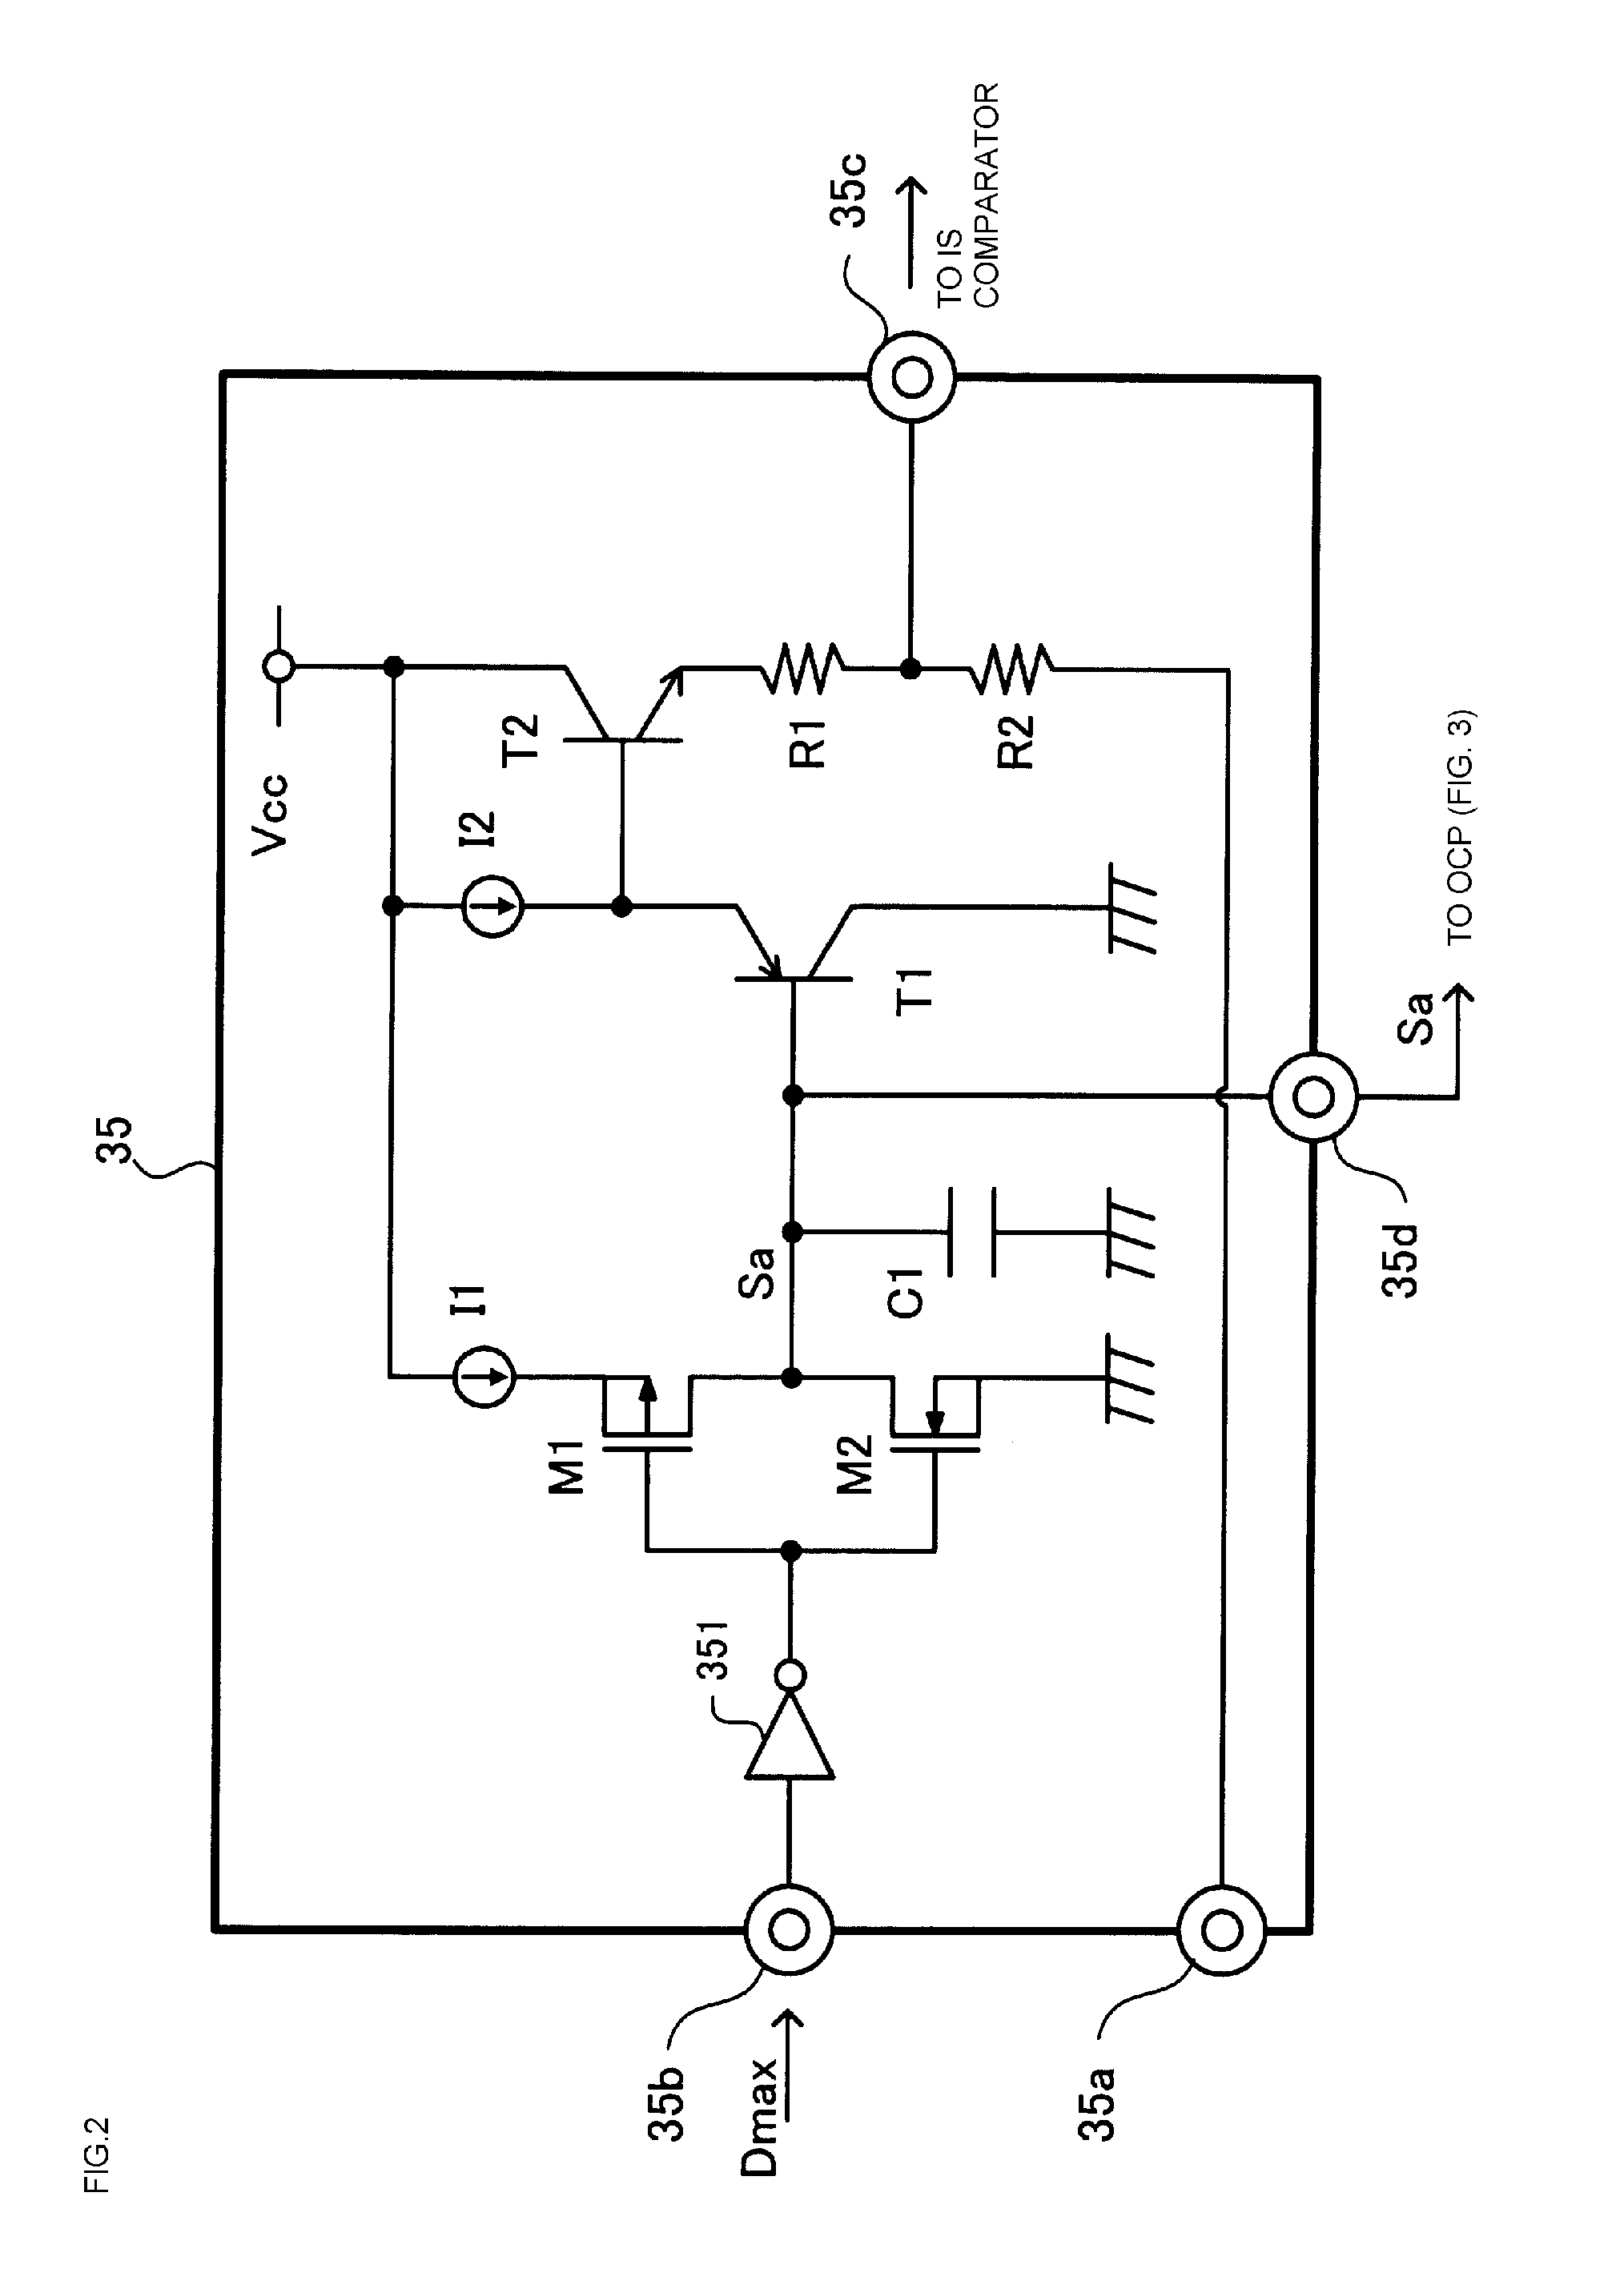 Switching power supply device control circuit having an overcurrent protection control circuit